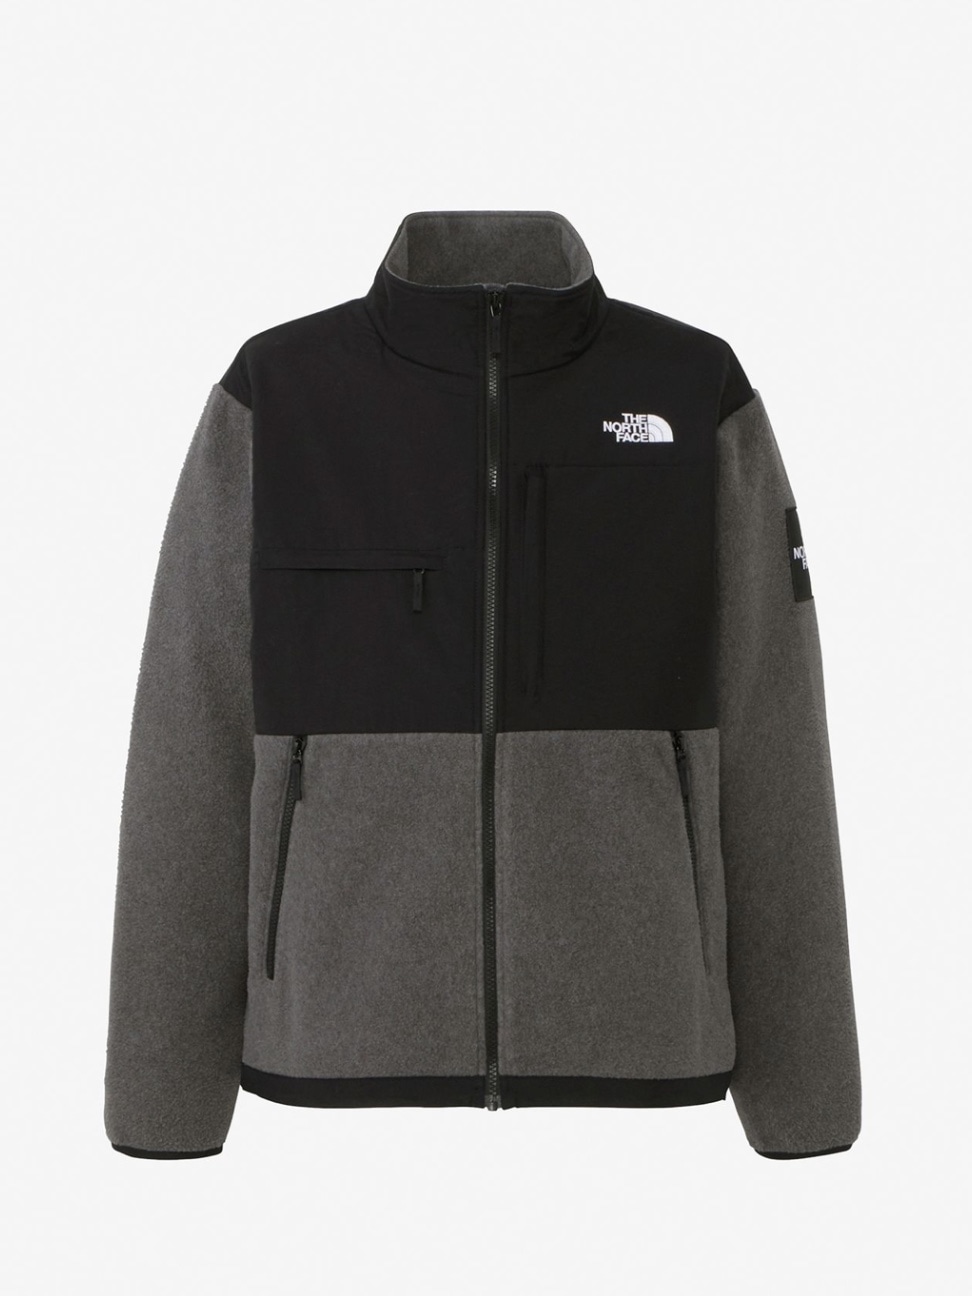 THE NORTH FACE Denali Jacket(M MIX GRAY)｜ B'2nd｜名古屋PARCO ...